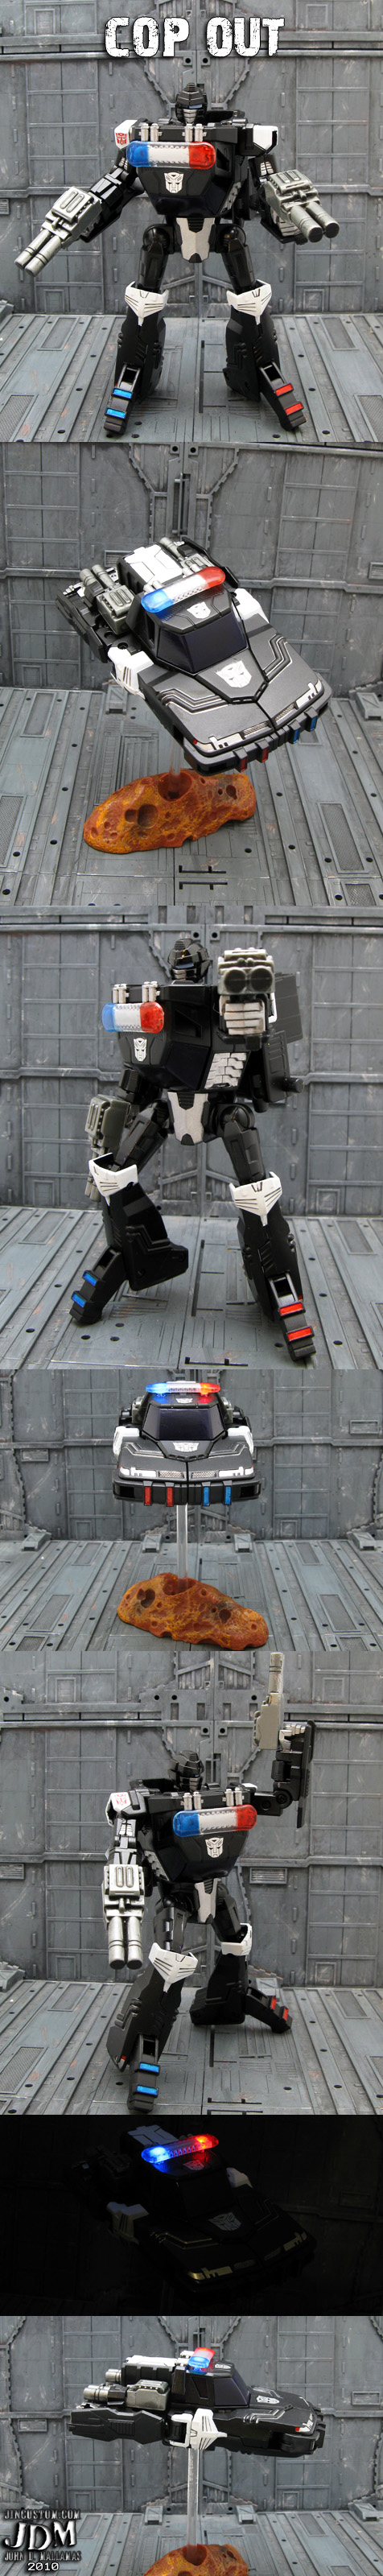 Transformers Police